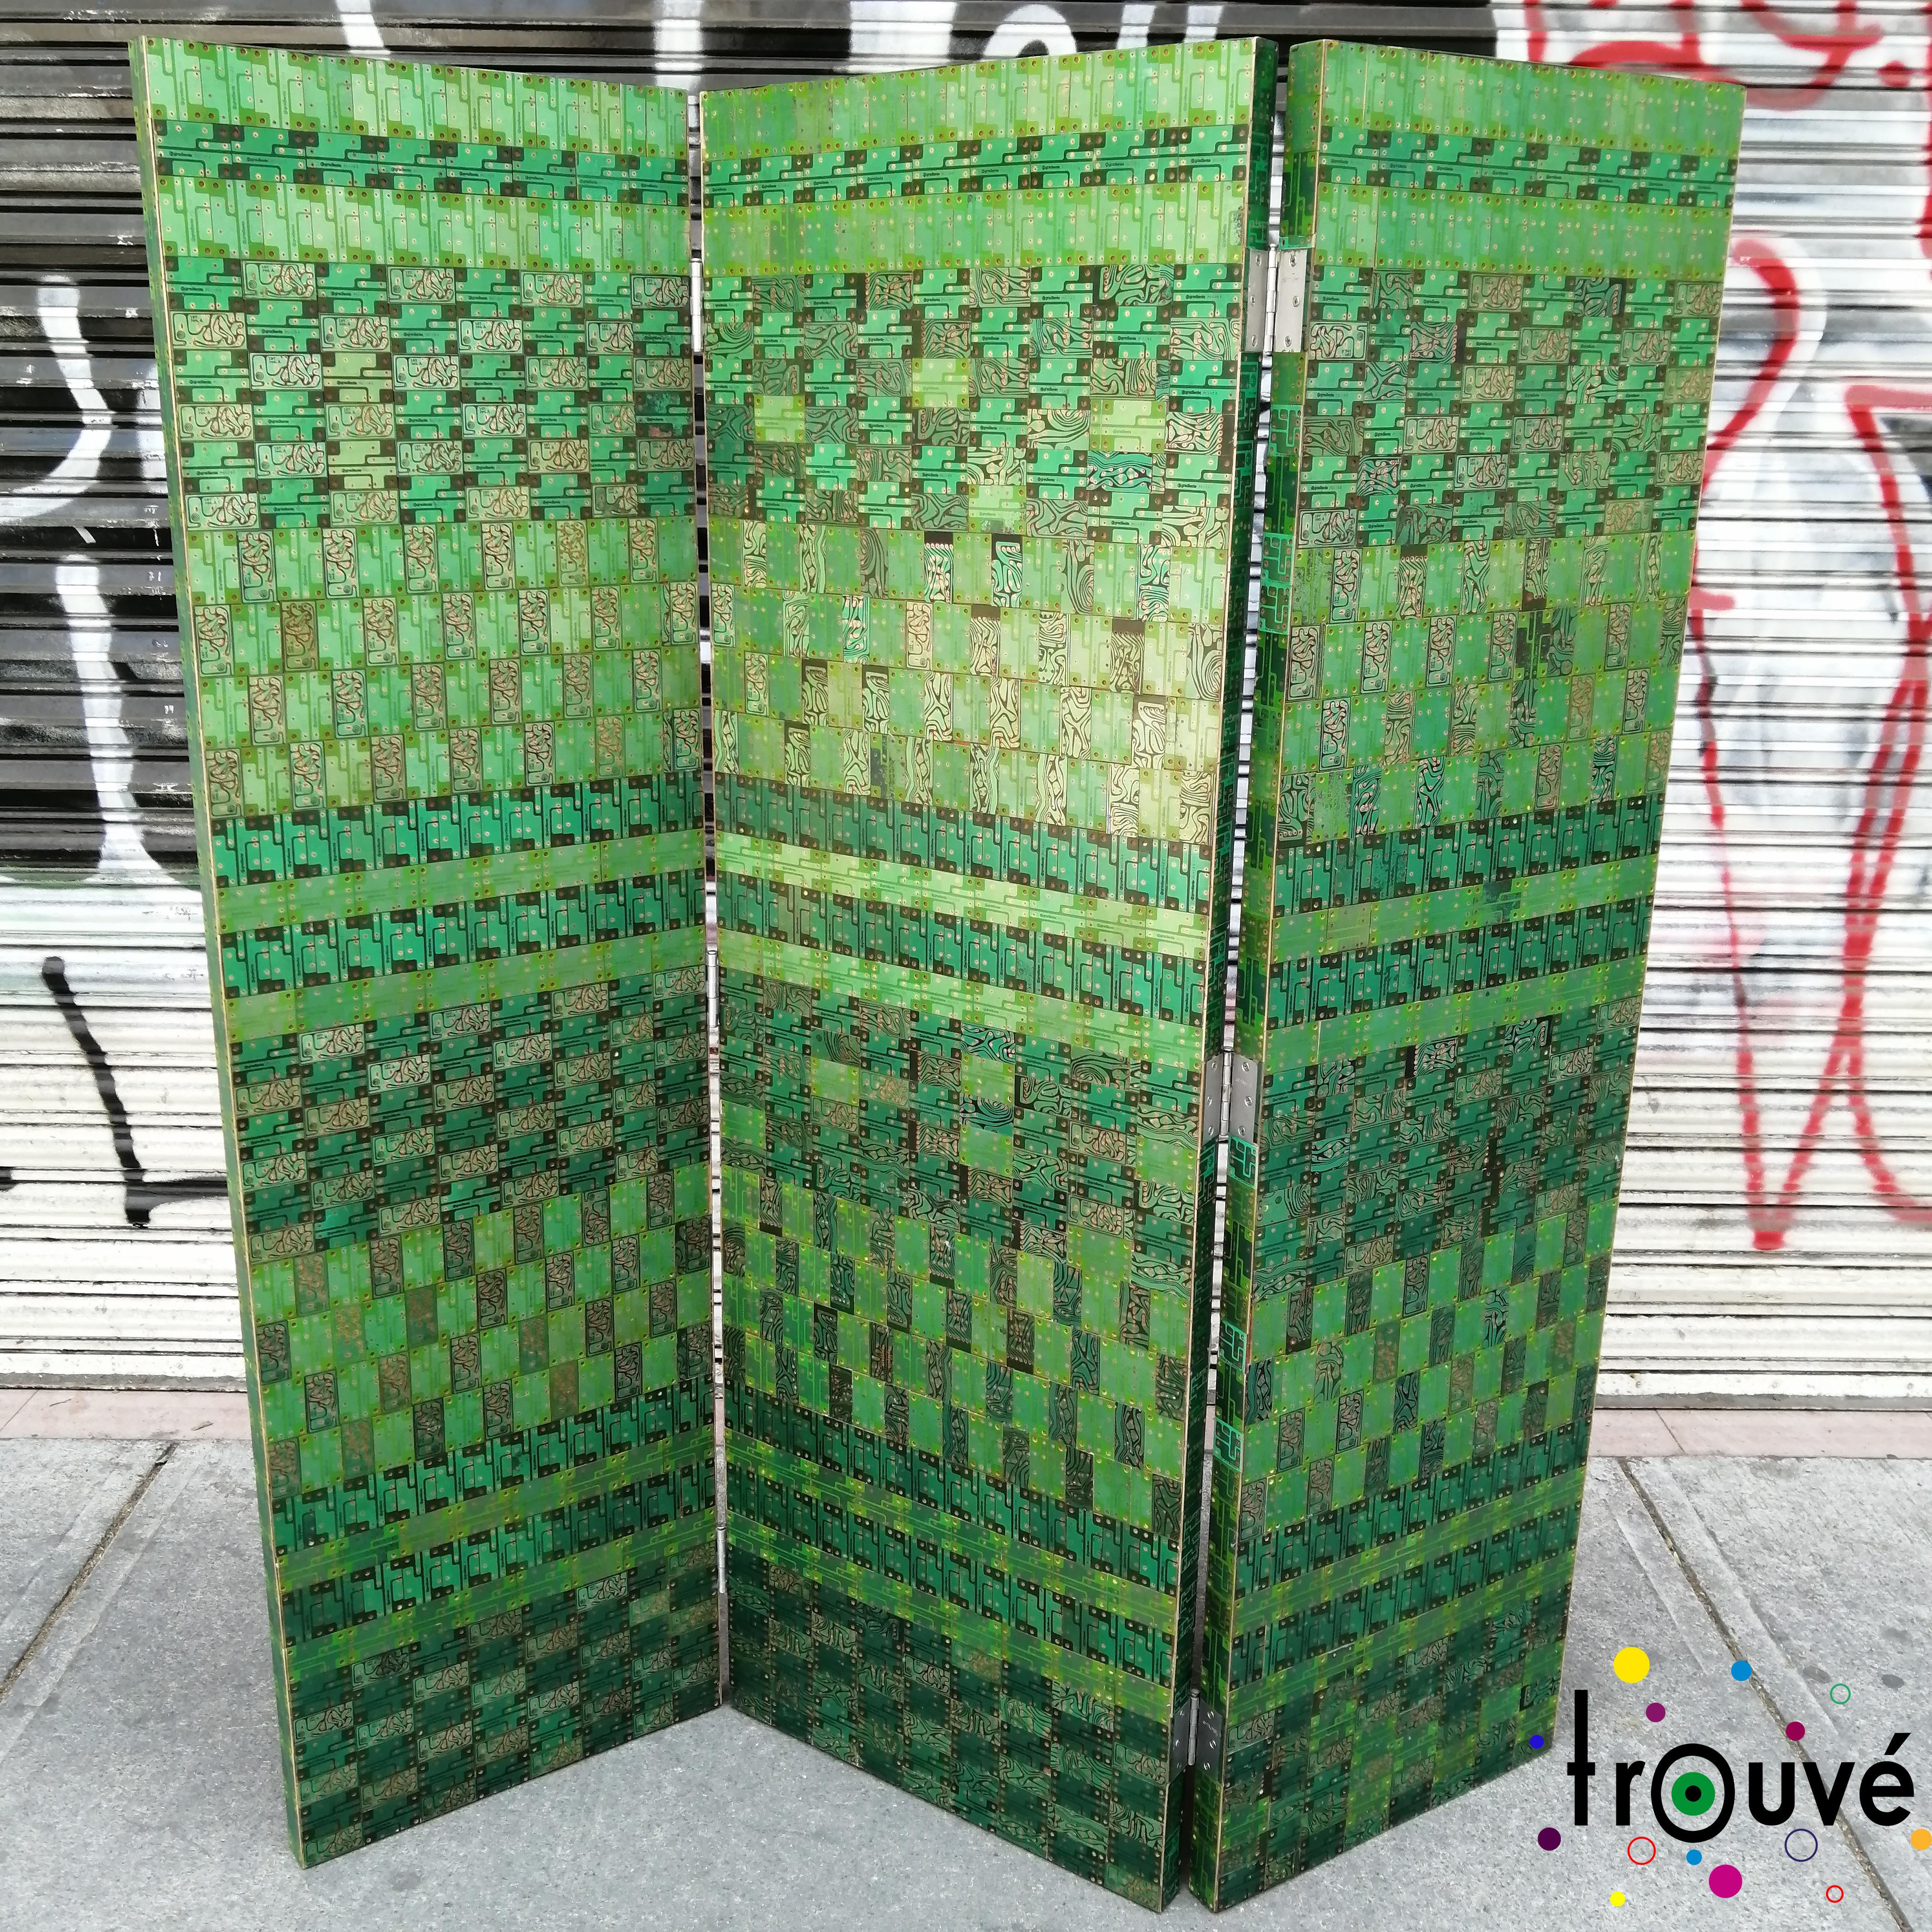 A 3-panel screen with inlaid green circuit boards. The screen's back in lacquered black. Two of the panels are the same size. The third panel is narrower (see dimensions below). Unique handmade piece.

Panel's dimensions:
Height 170 cm. (67